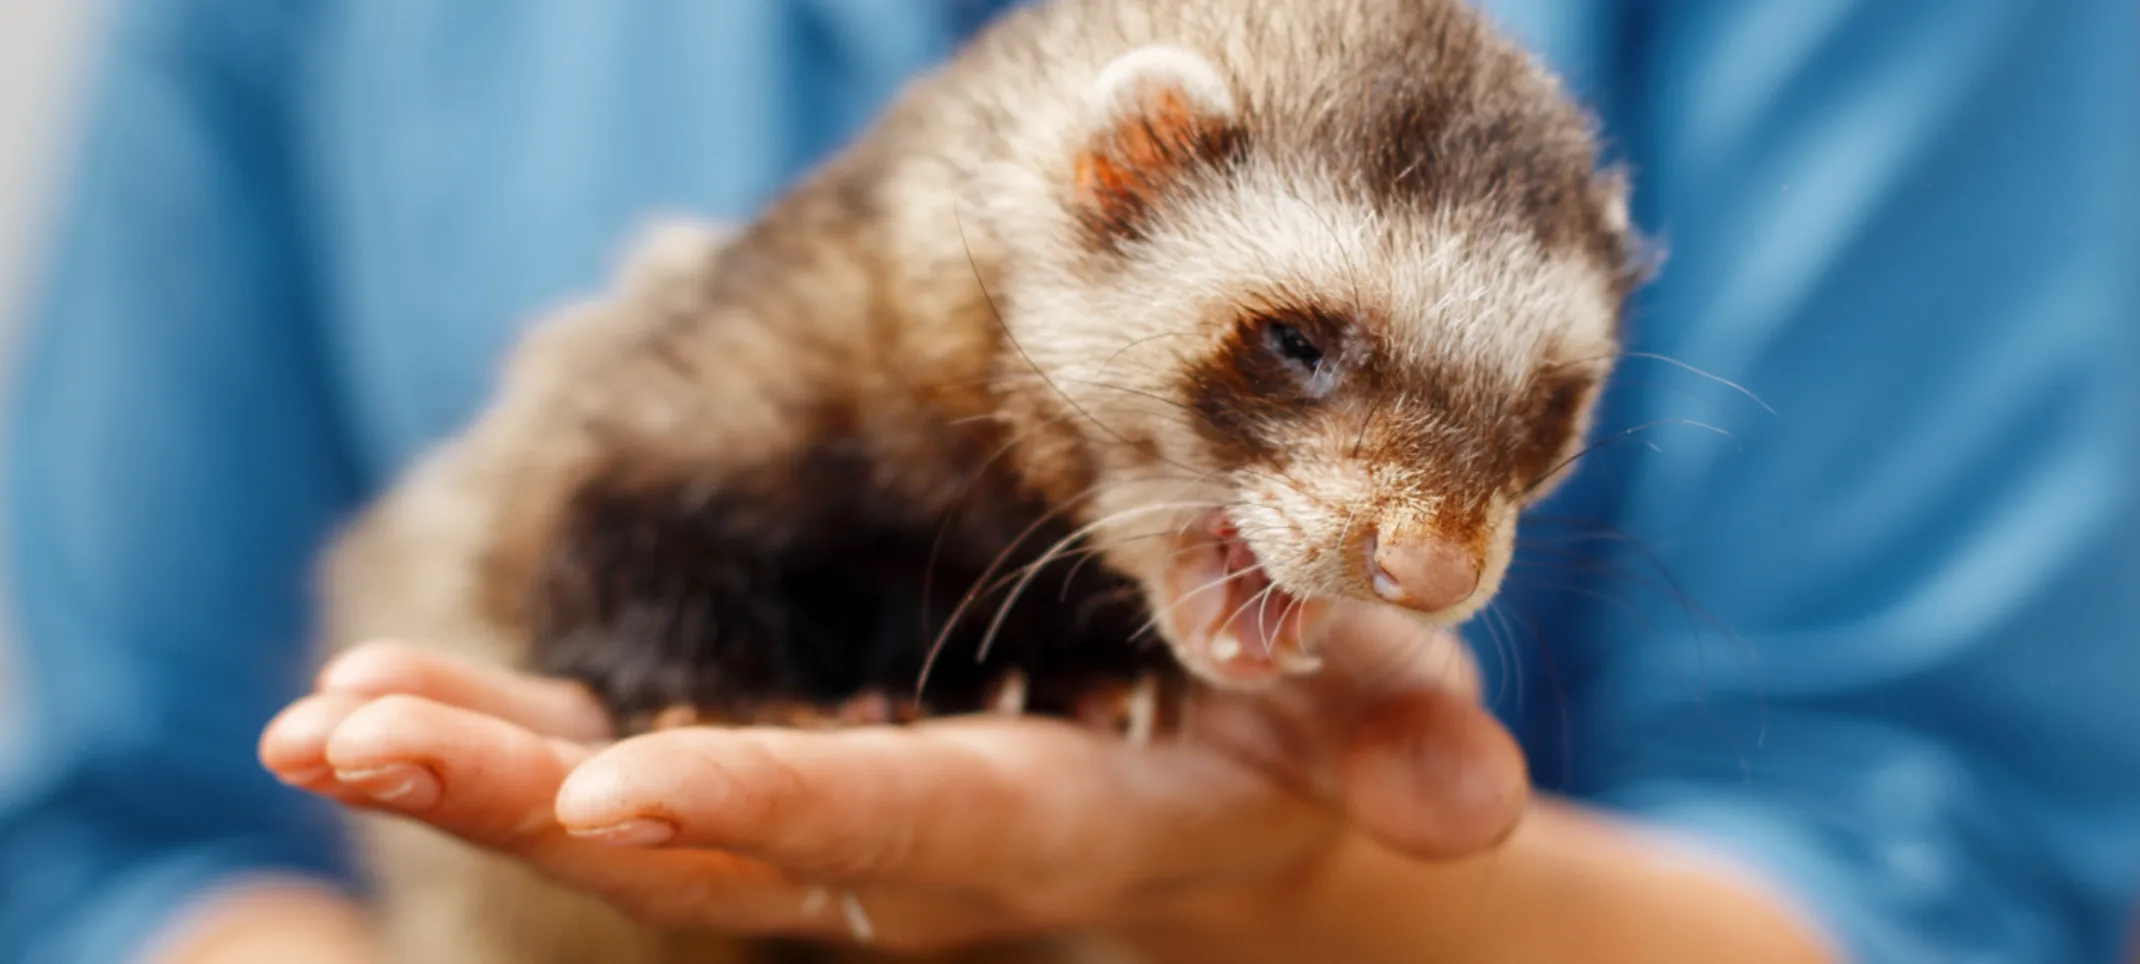 Woman holding ferret in hands